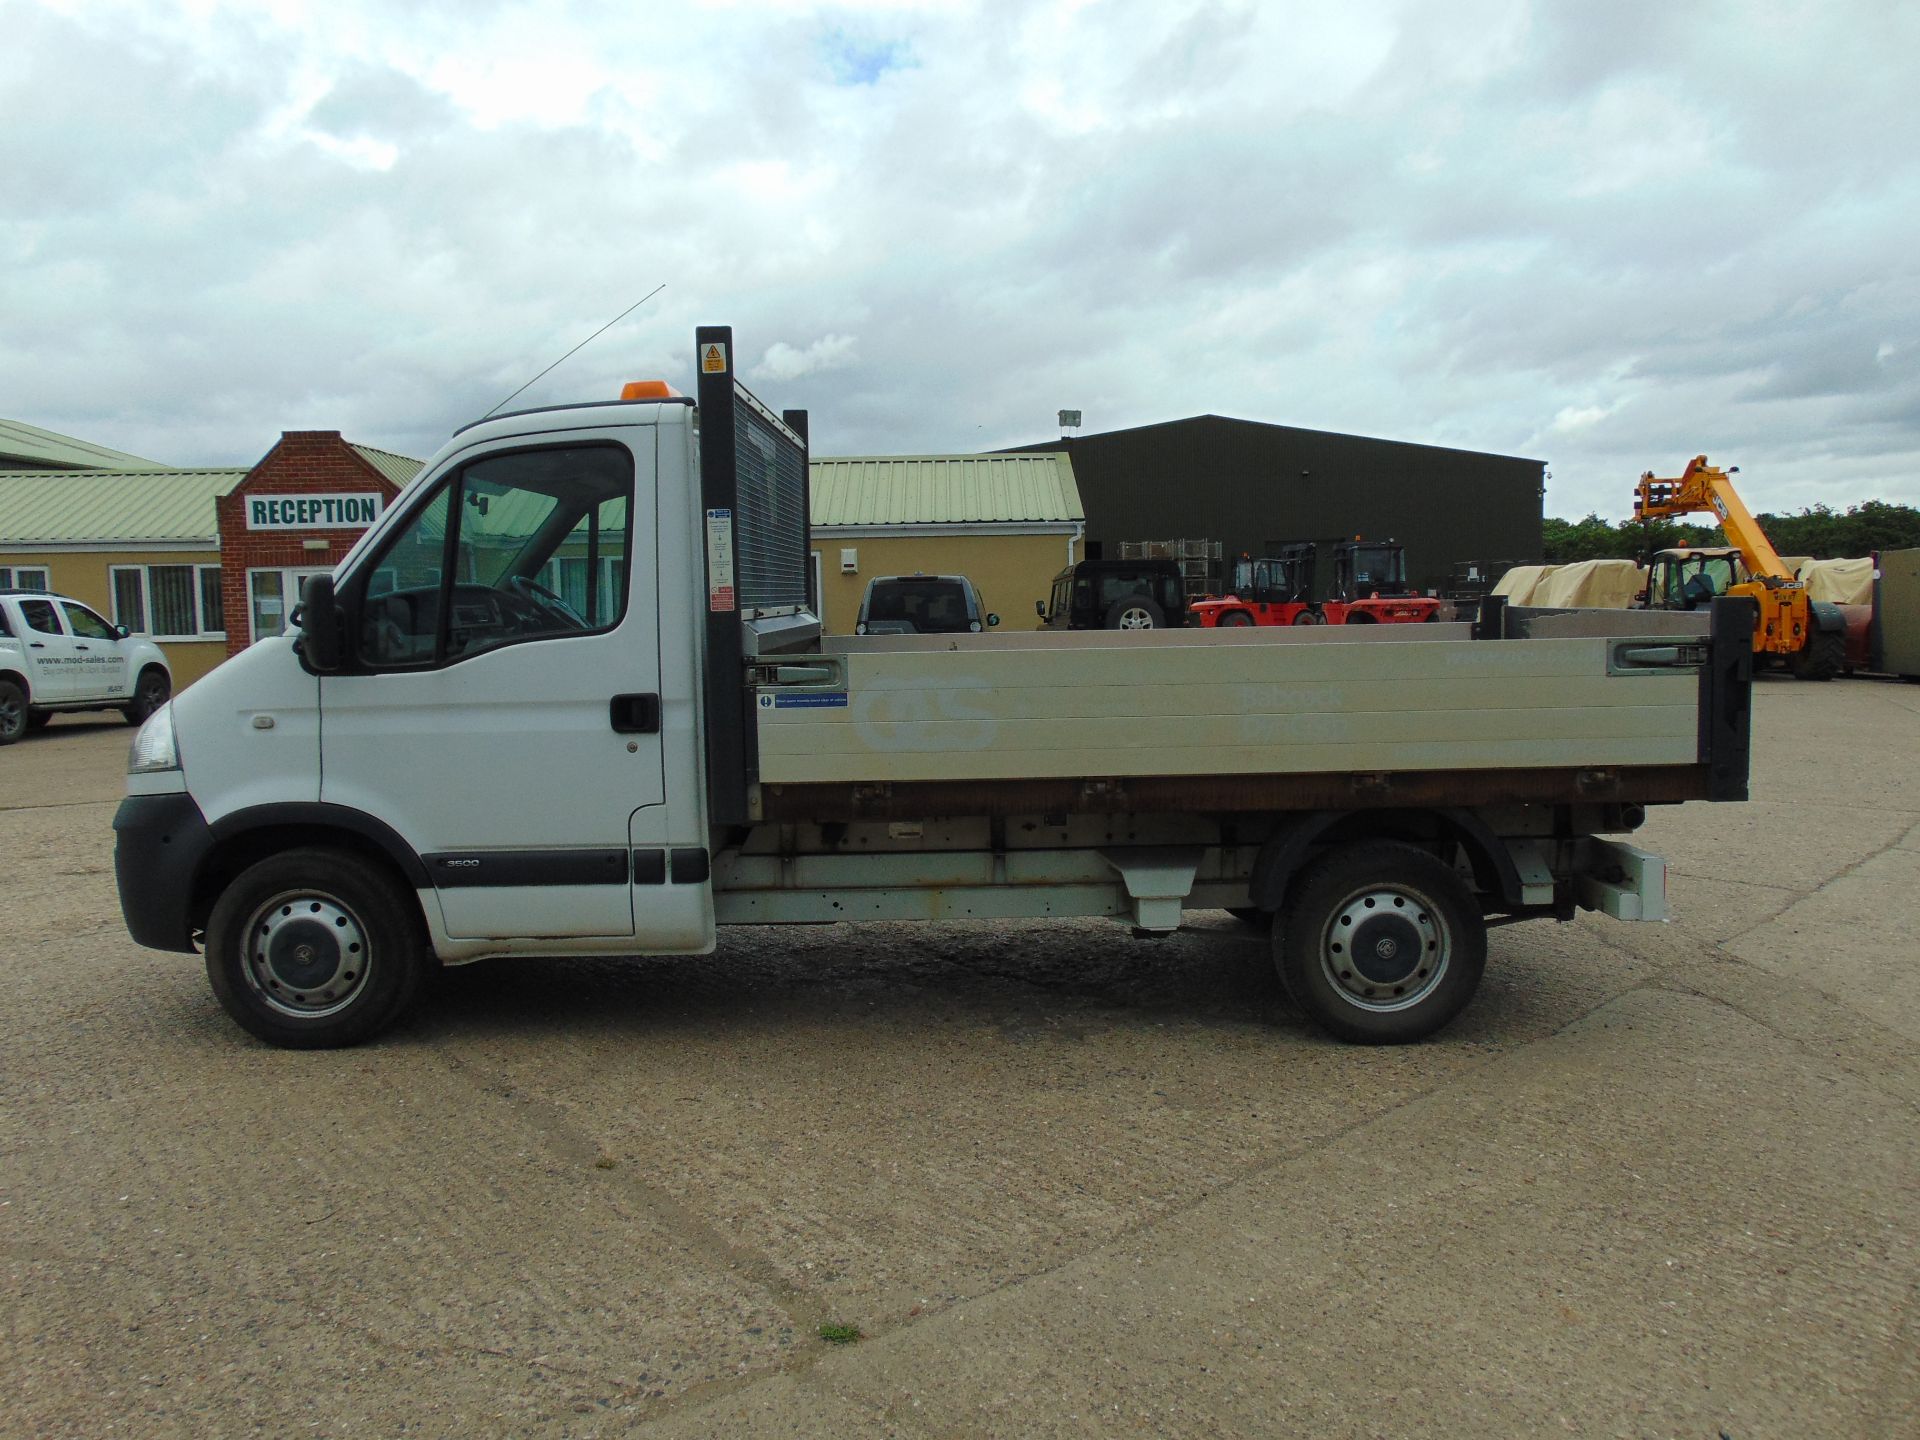 2010 Vauxhall Movano 3500 2.5 CDTi MWB Flat Bed Tipper - Image 4 of 15